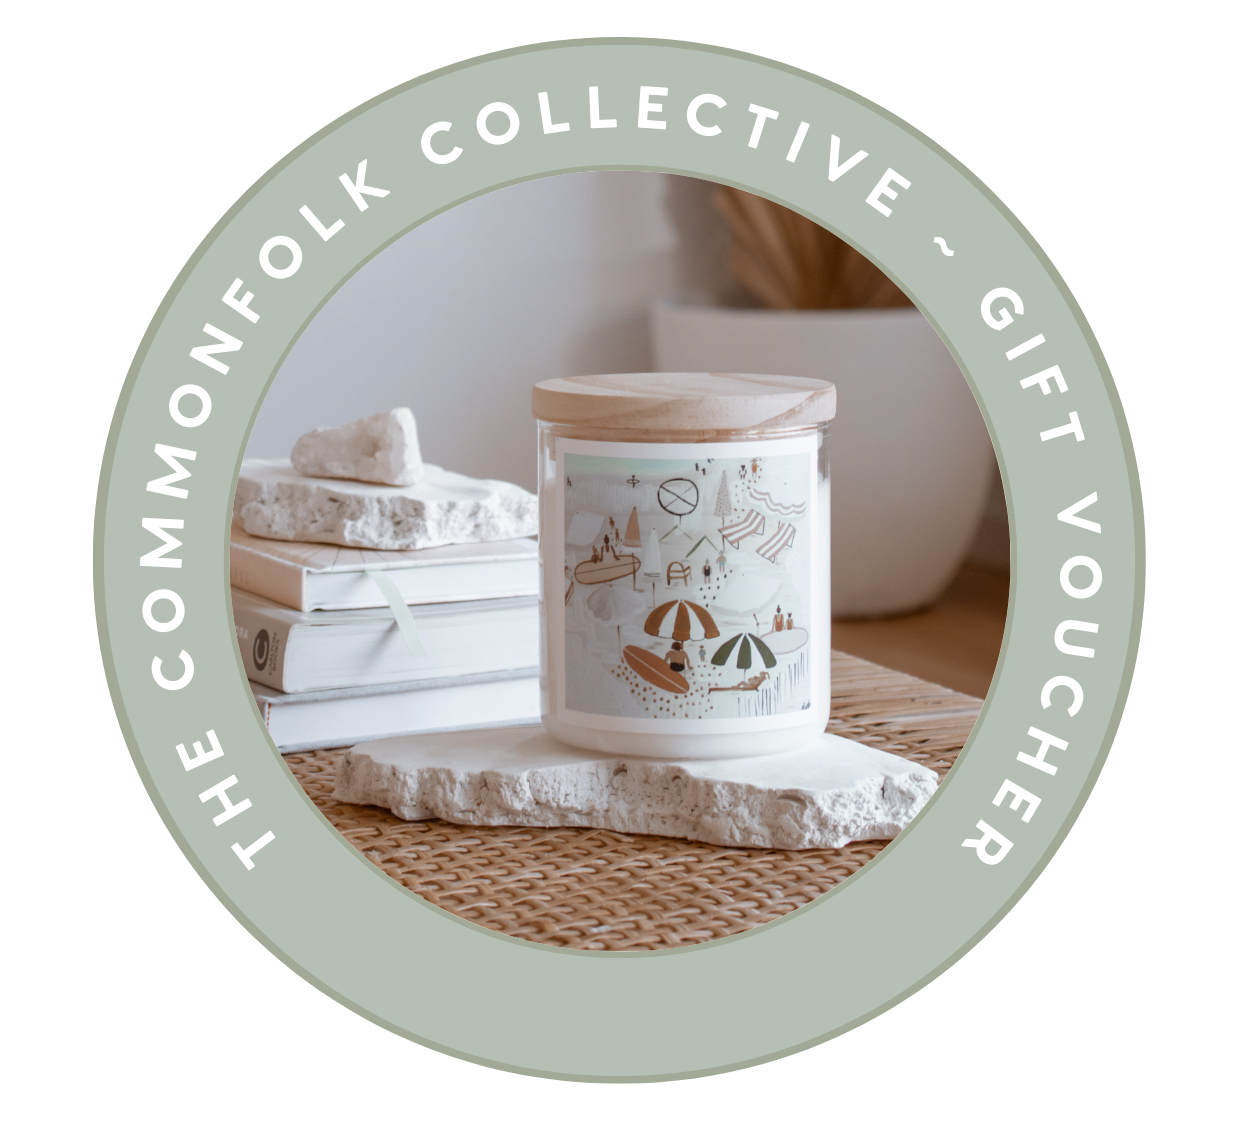 Commonfolk Collective Gift Voucher